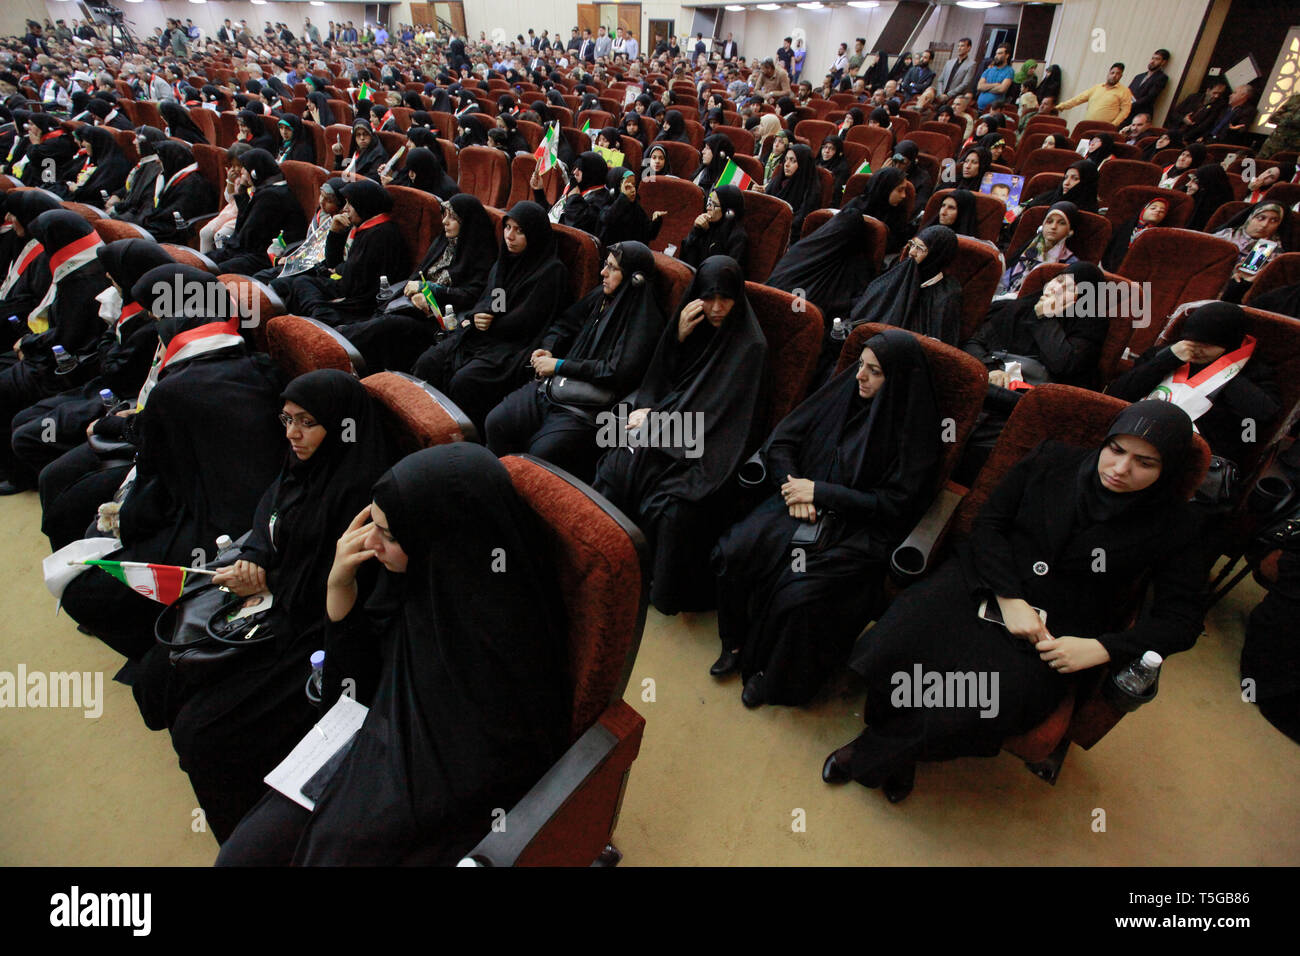 Baghdad, Iraq. 24th Apr, 2019. Women holding flags of Iran and Iraq attend a conference organized by the predominantly Shia Muslim Popular Mobilization Forces (PMF) to honour Iranian fighters who died fighting the so-called Islamic State (IS) terror group. Credit: Ameer Al Mohammedaw/dpa/Alamy Live News Stock Photo